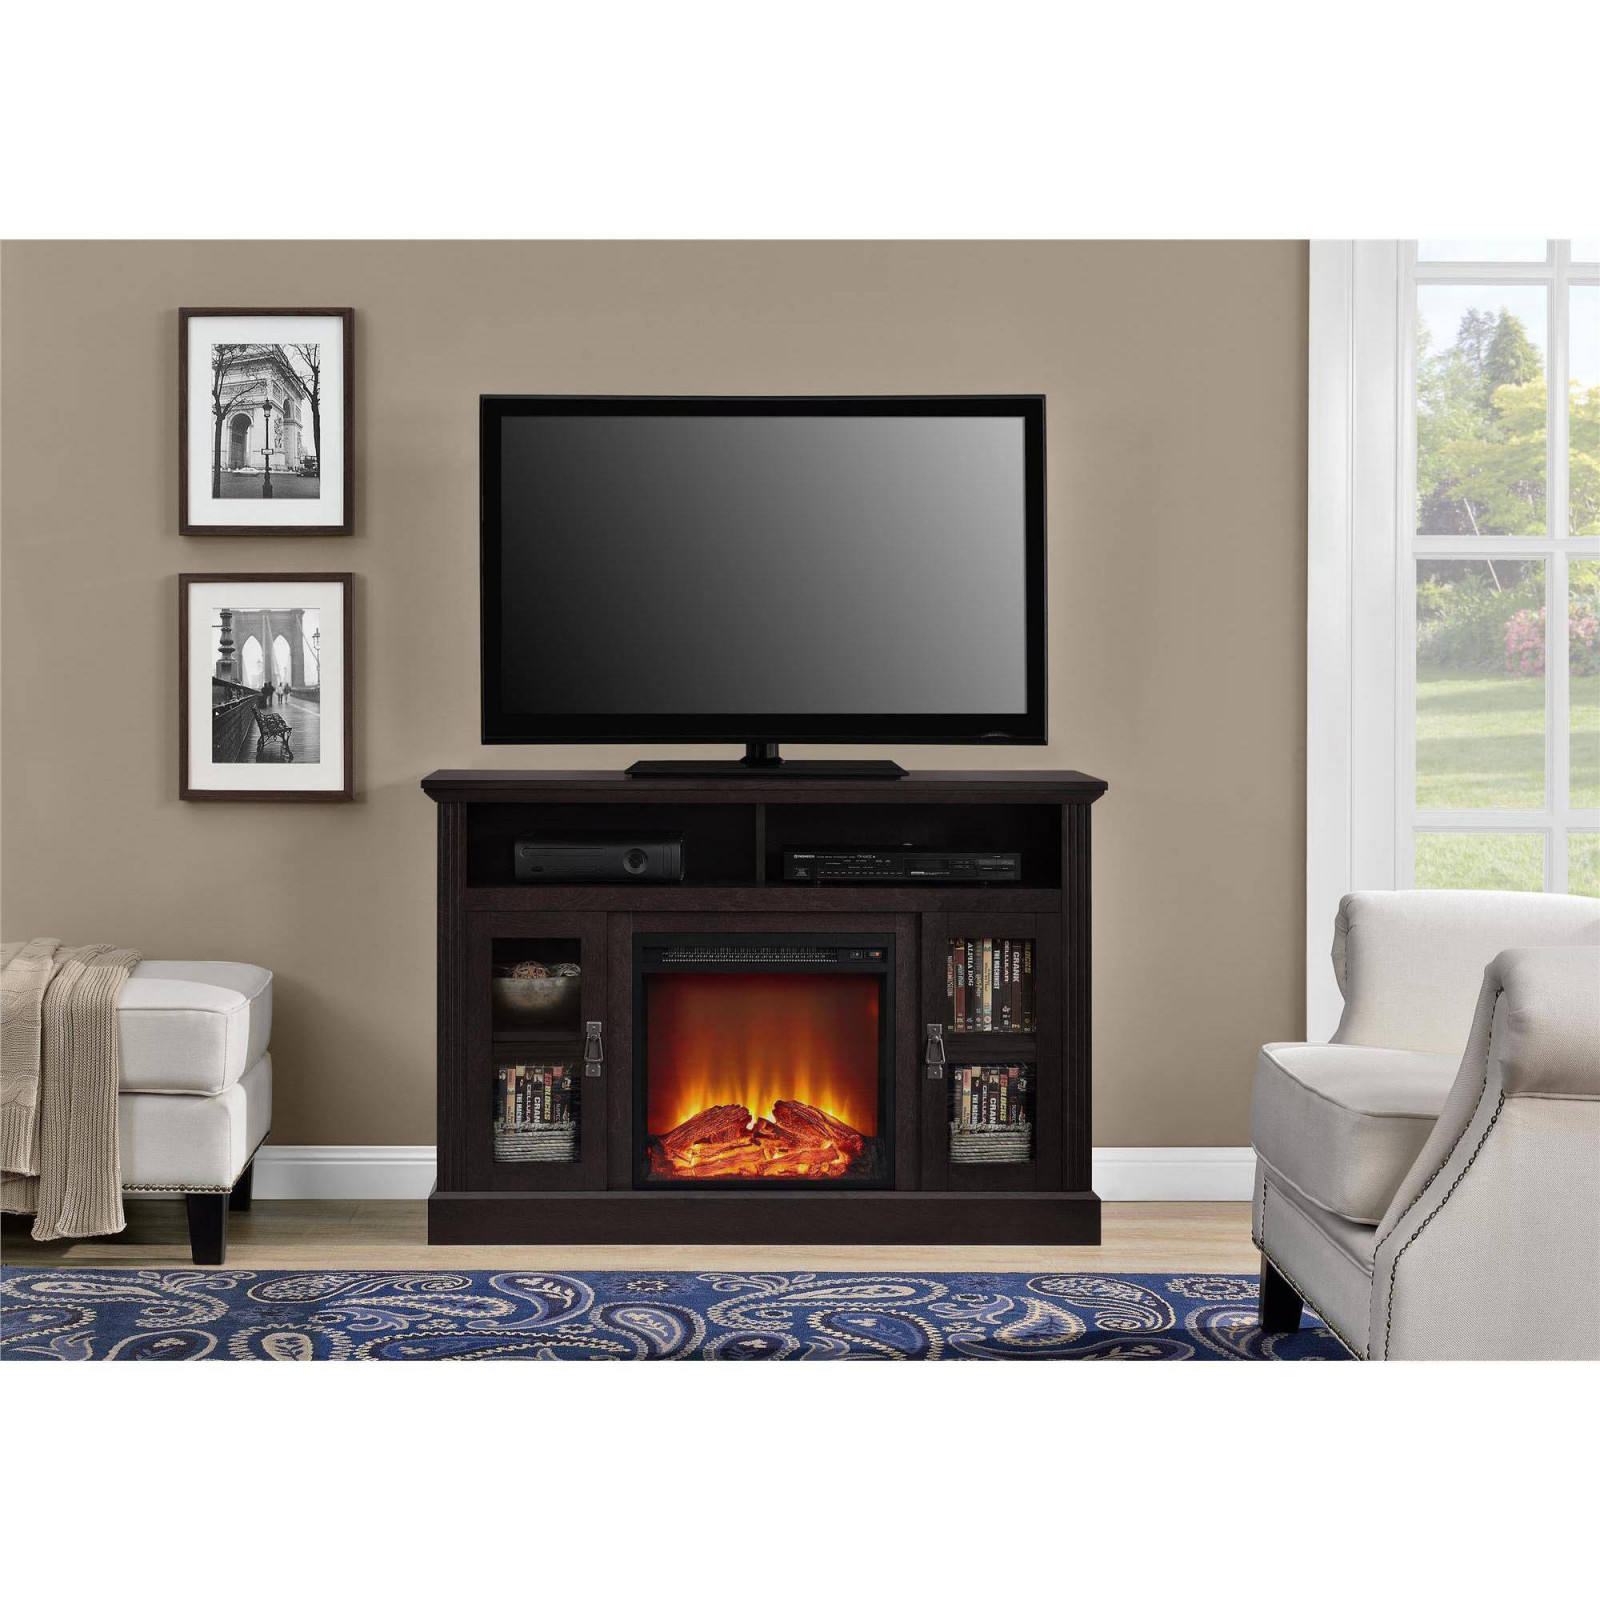 Tv Stand W Fireplace Lovely 35 Minimaliste Electric Fireplace Tv Stand